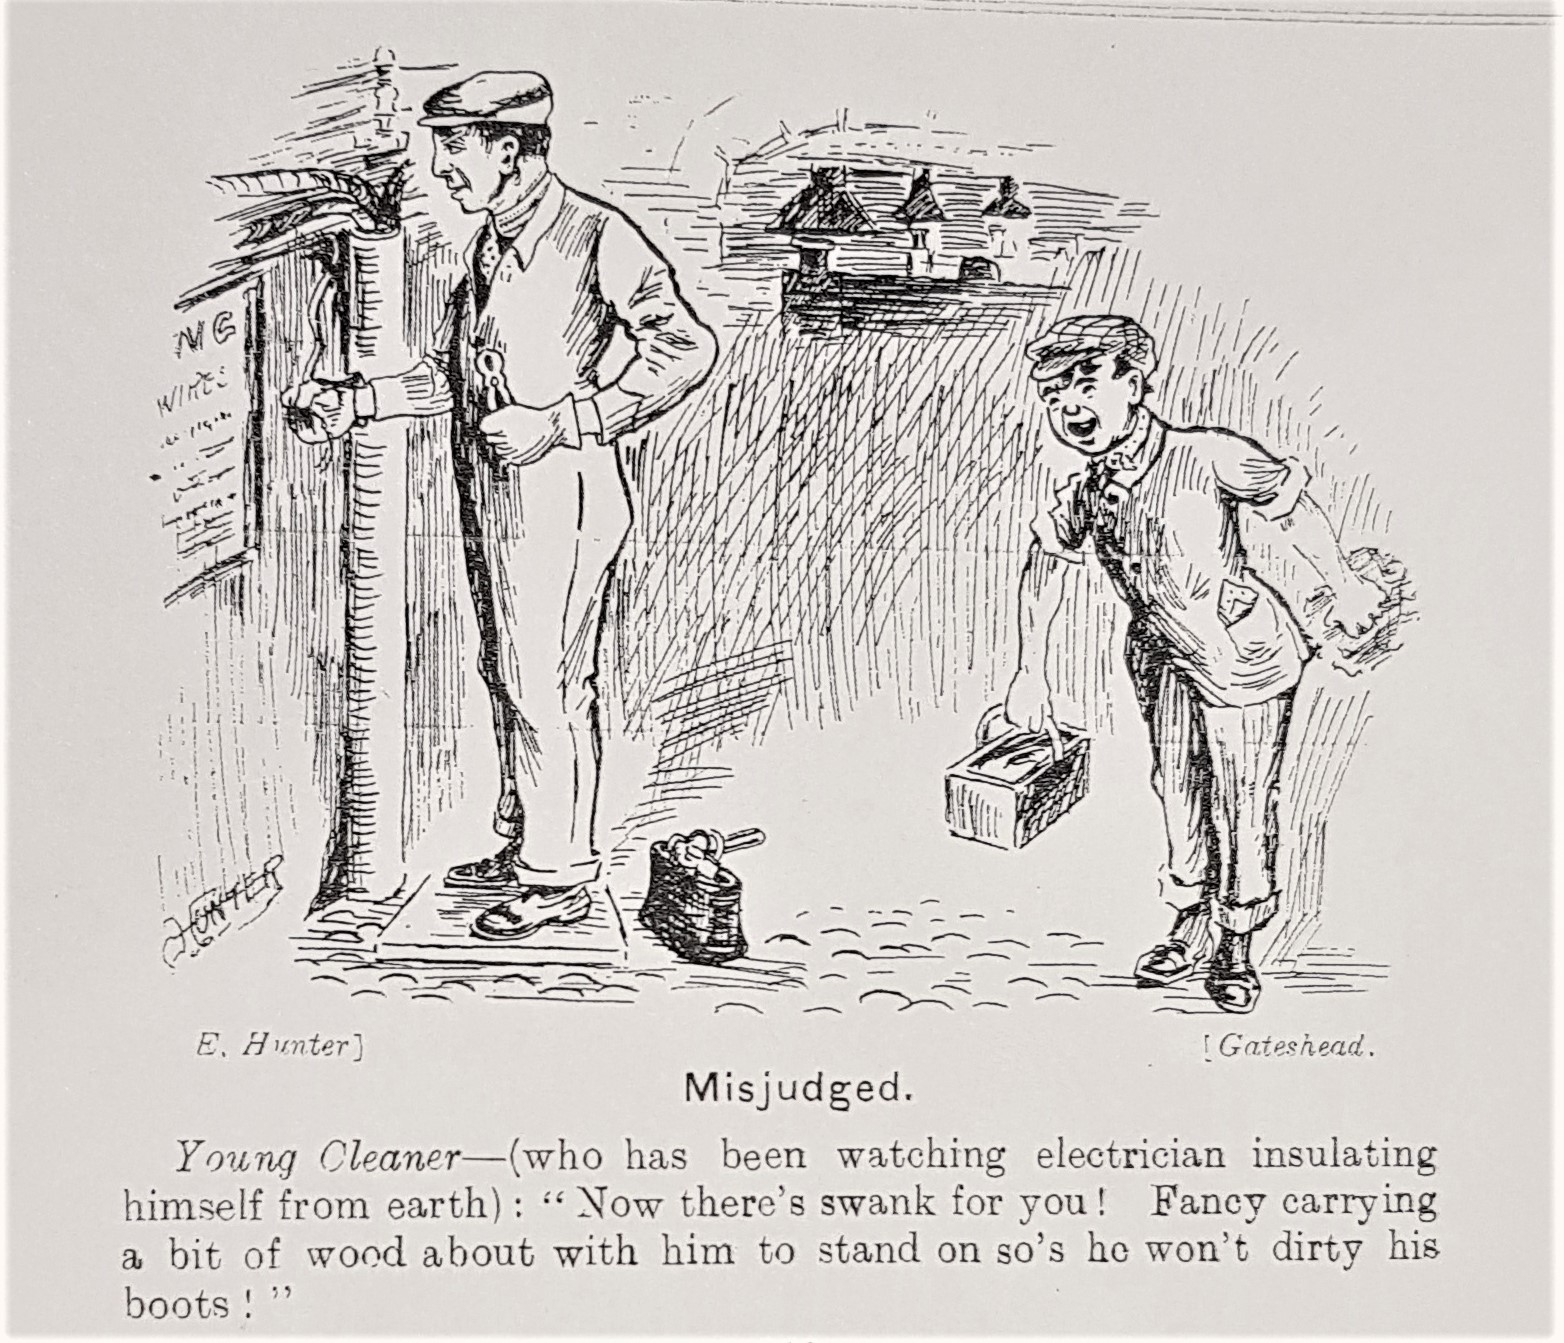 Cartoon from 1913, taking a humorous approach to issues around electrical safety